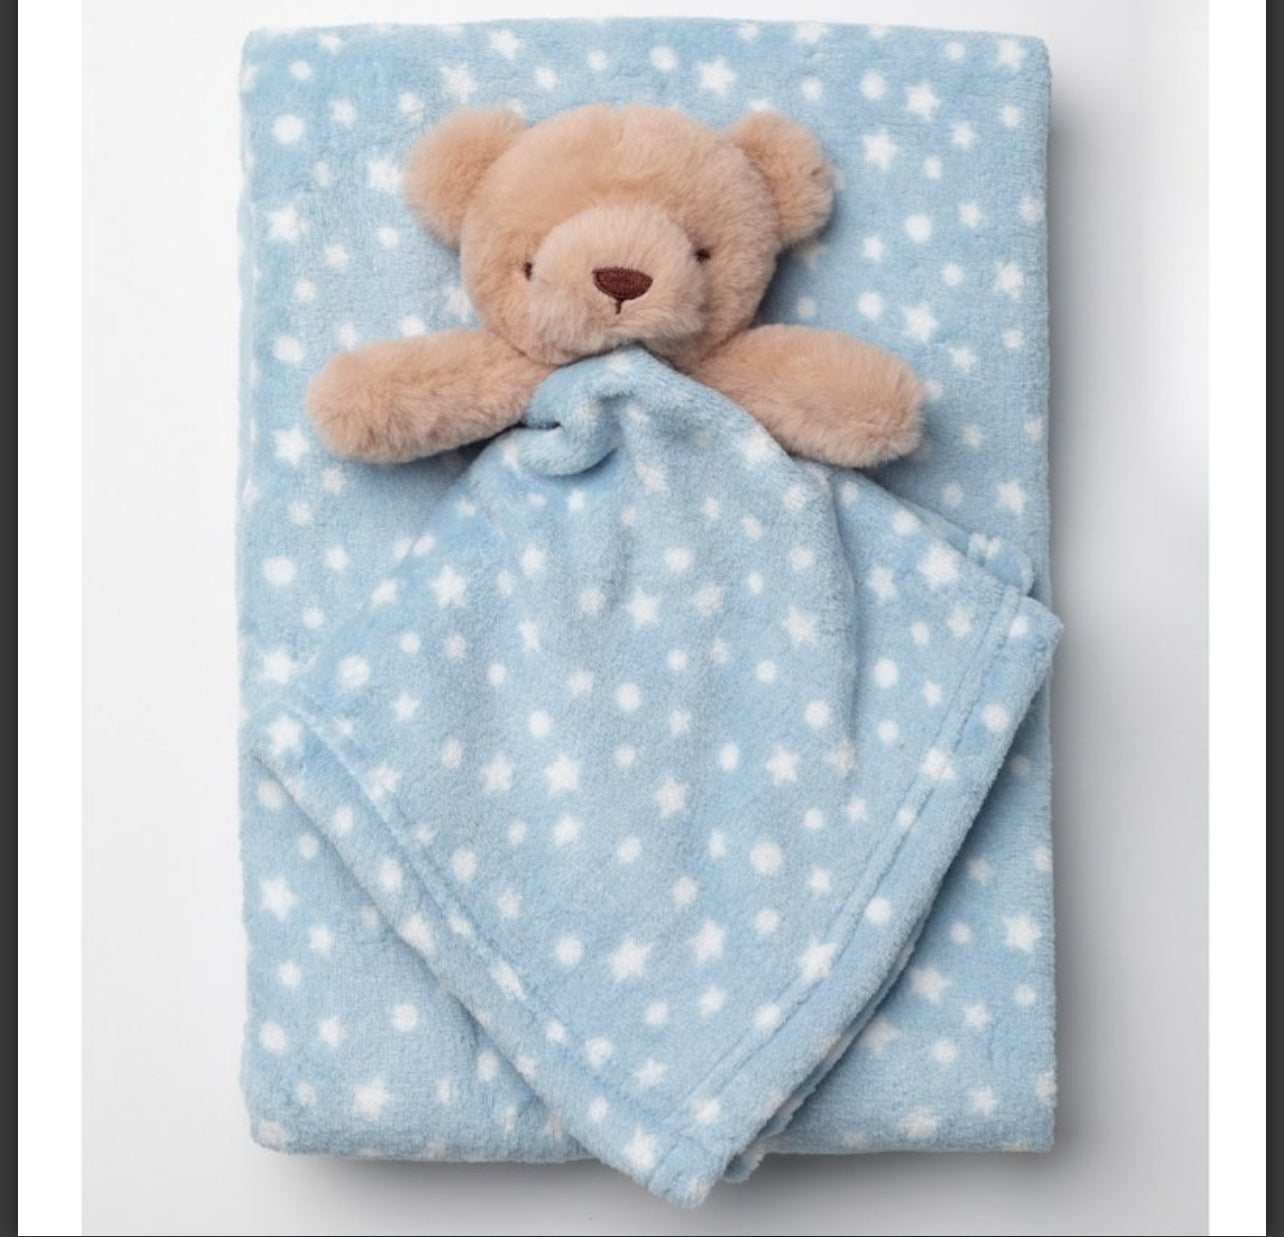 Blue Baby Blanket And Teddy Comforter, Personalised Blanket and Comforter